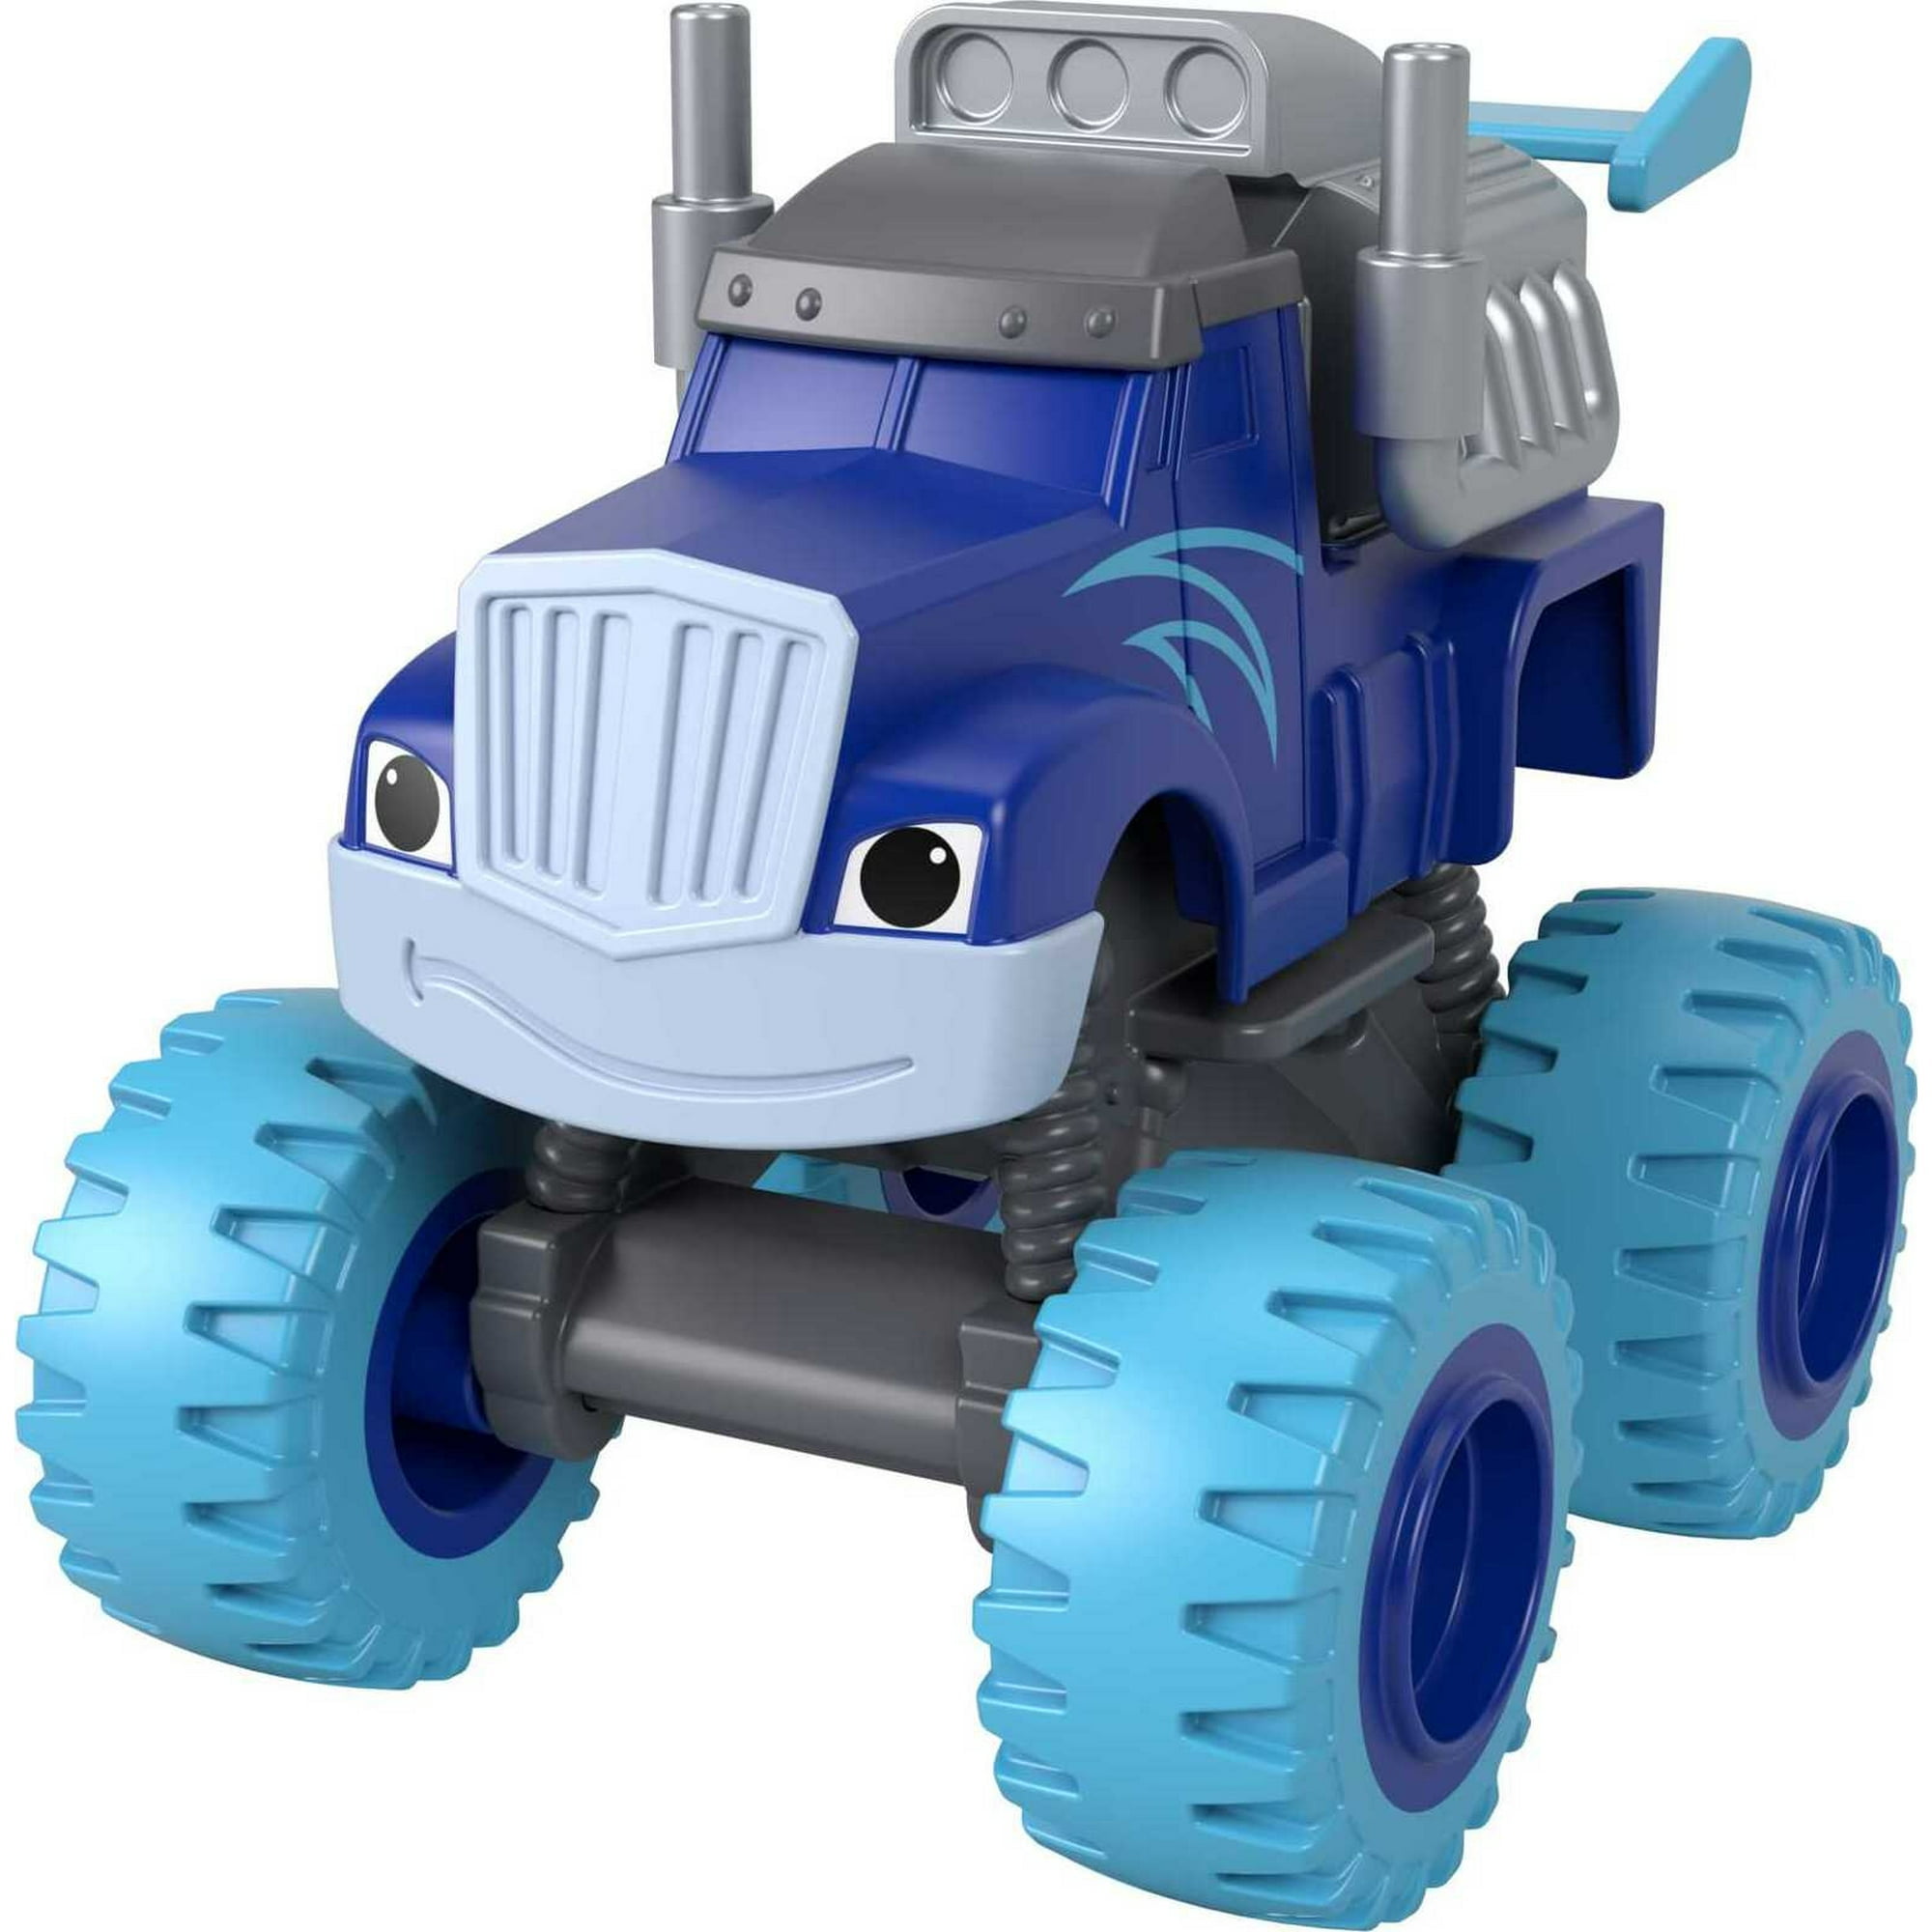  Fisher-Price Blaze and the Monster Machines Racers 4